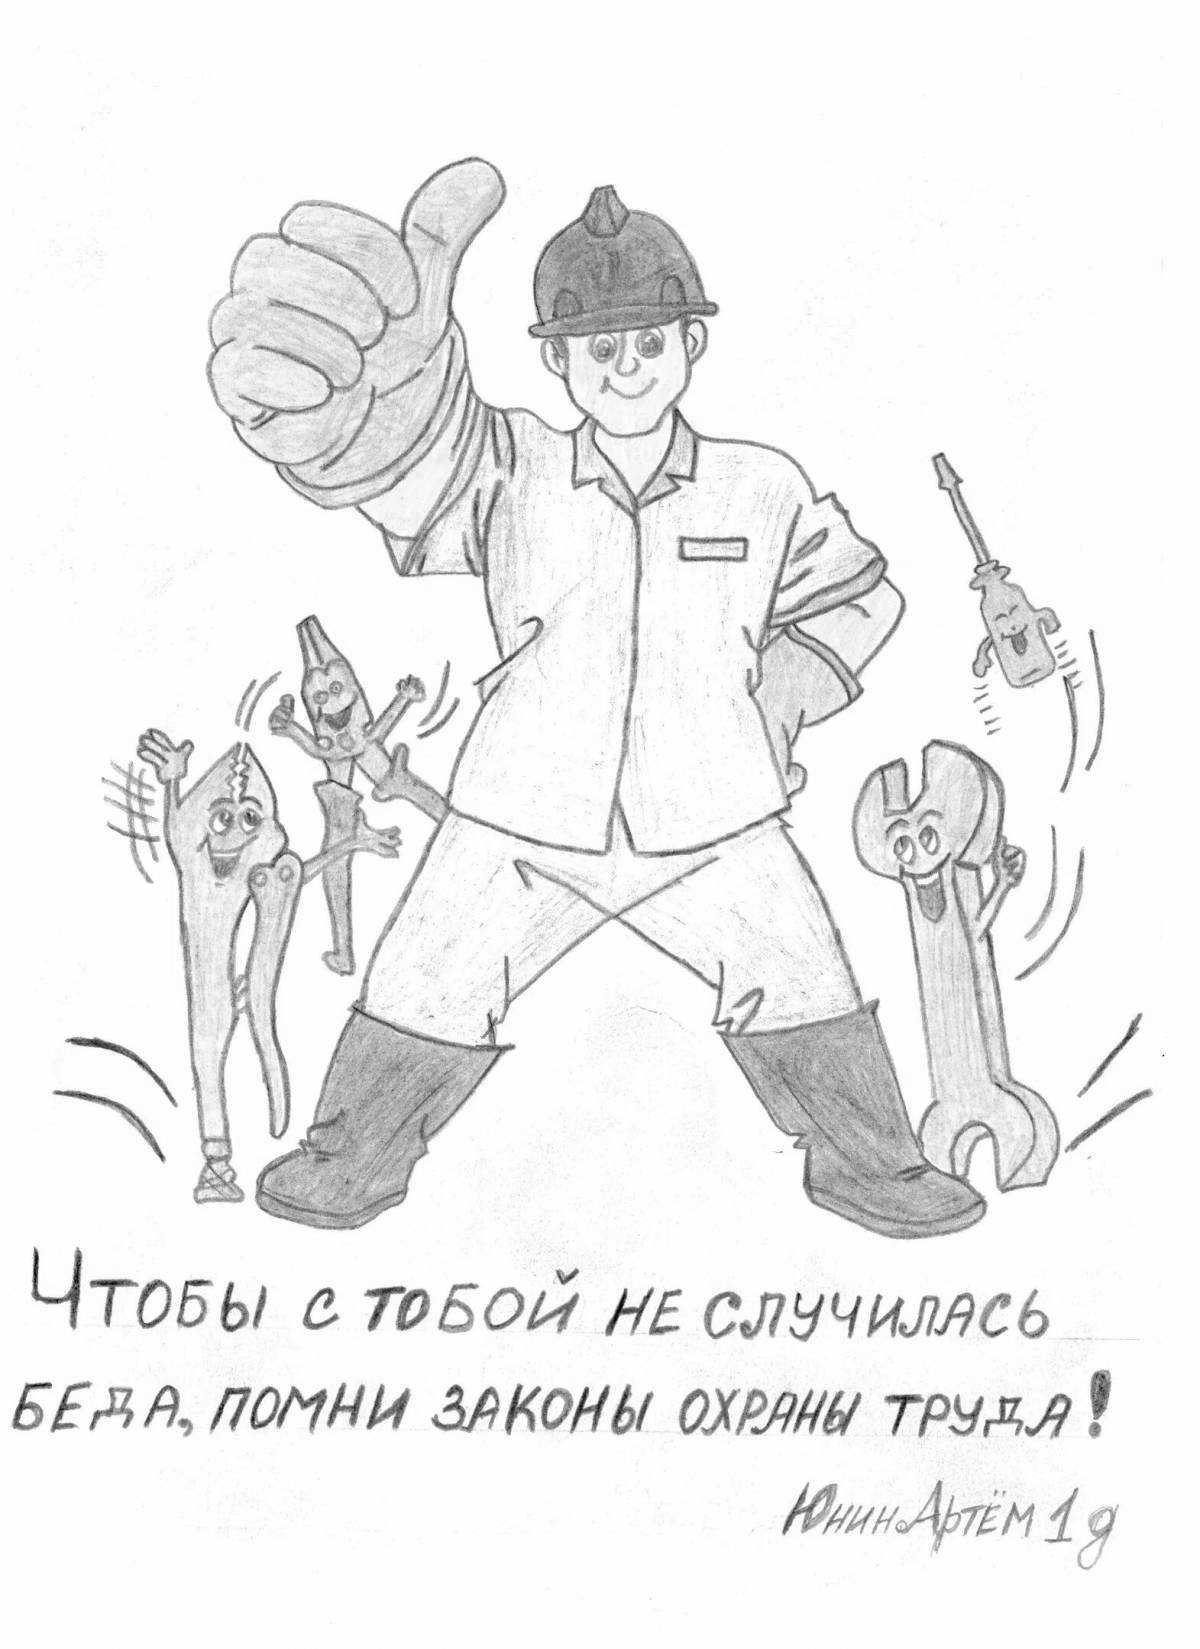 Figurative drawings on labor protection through the eyes of children